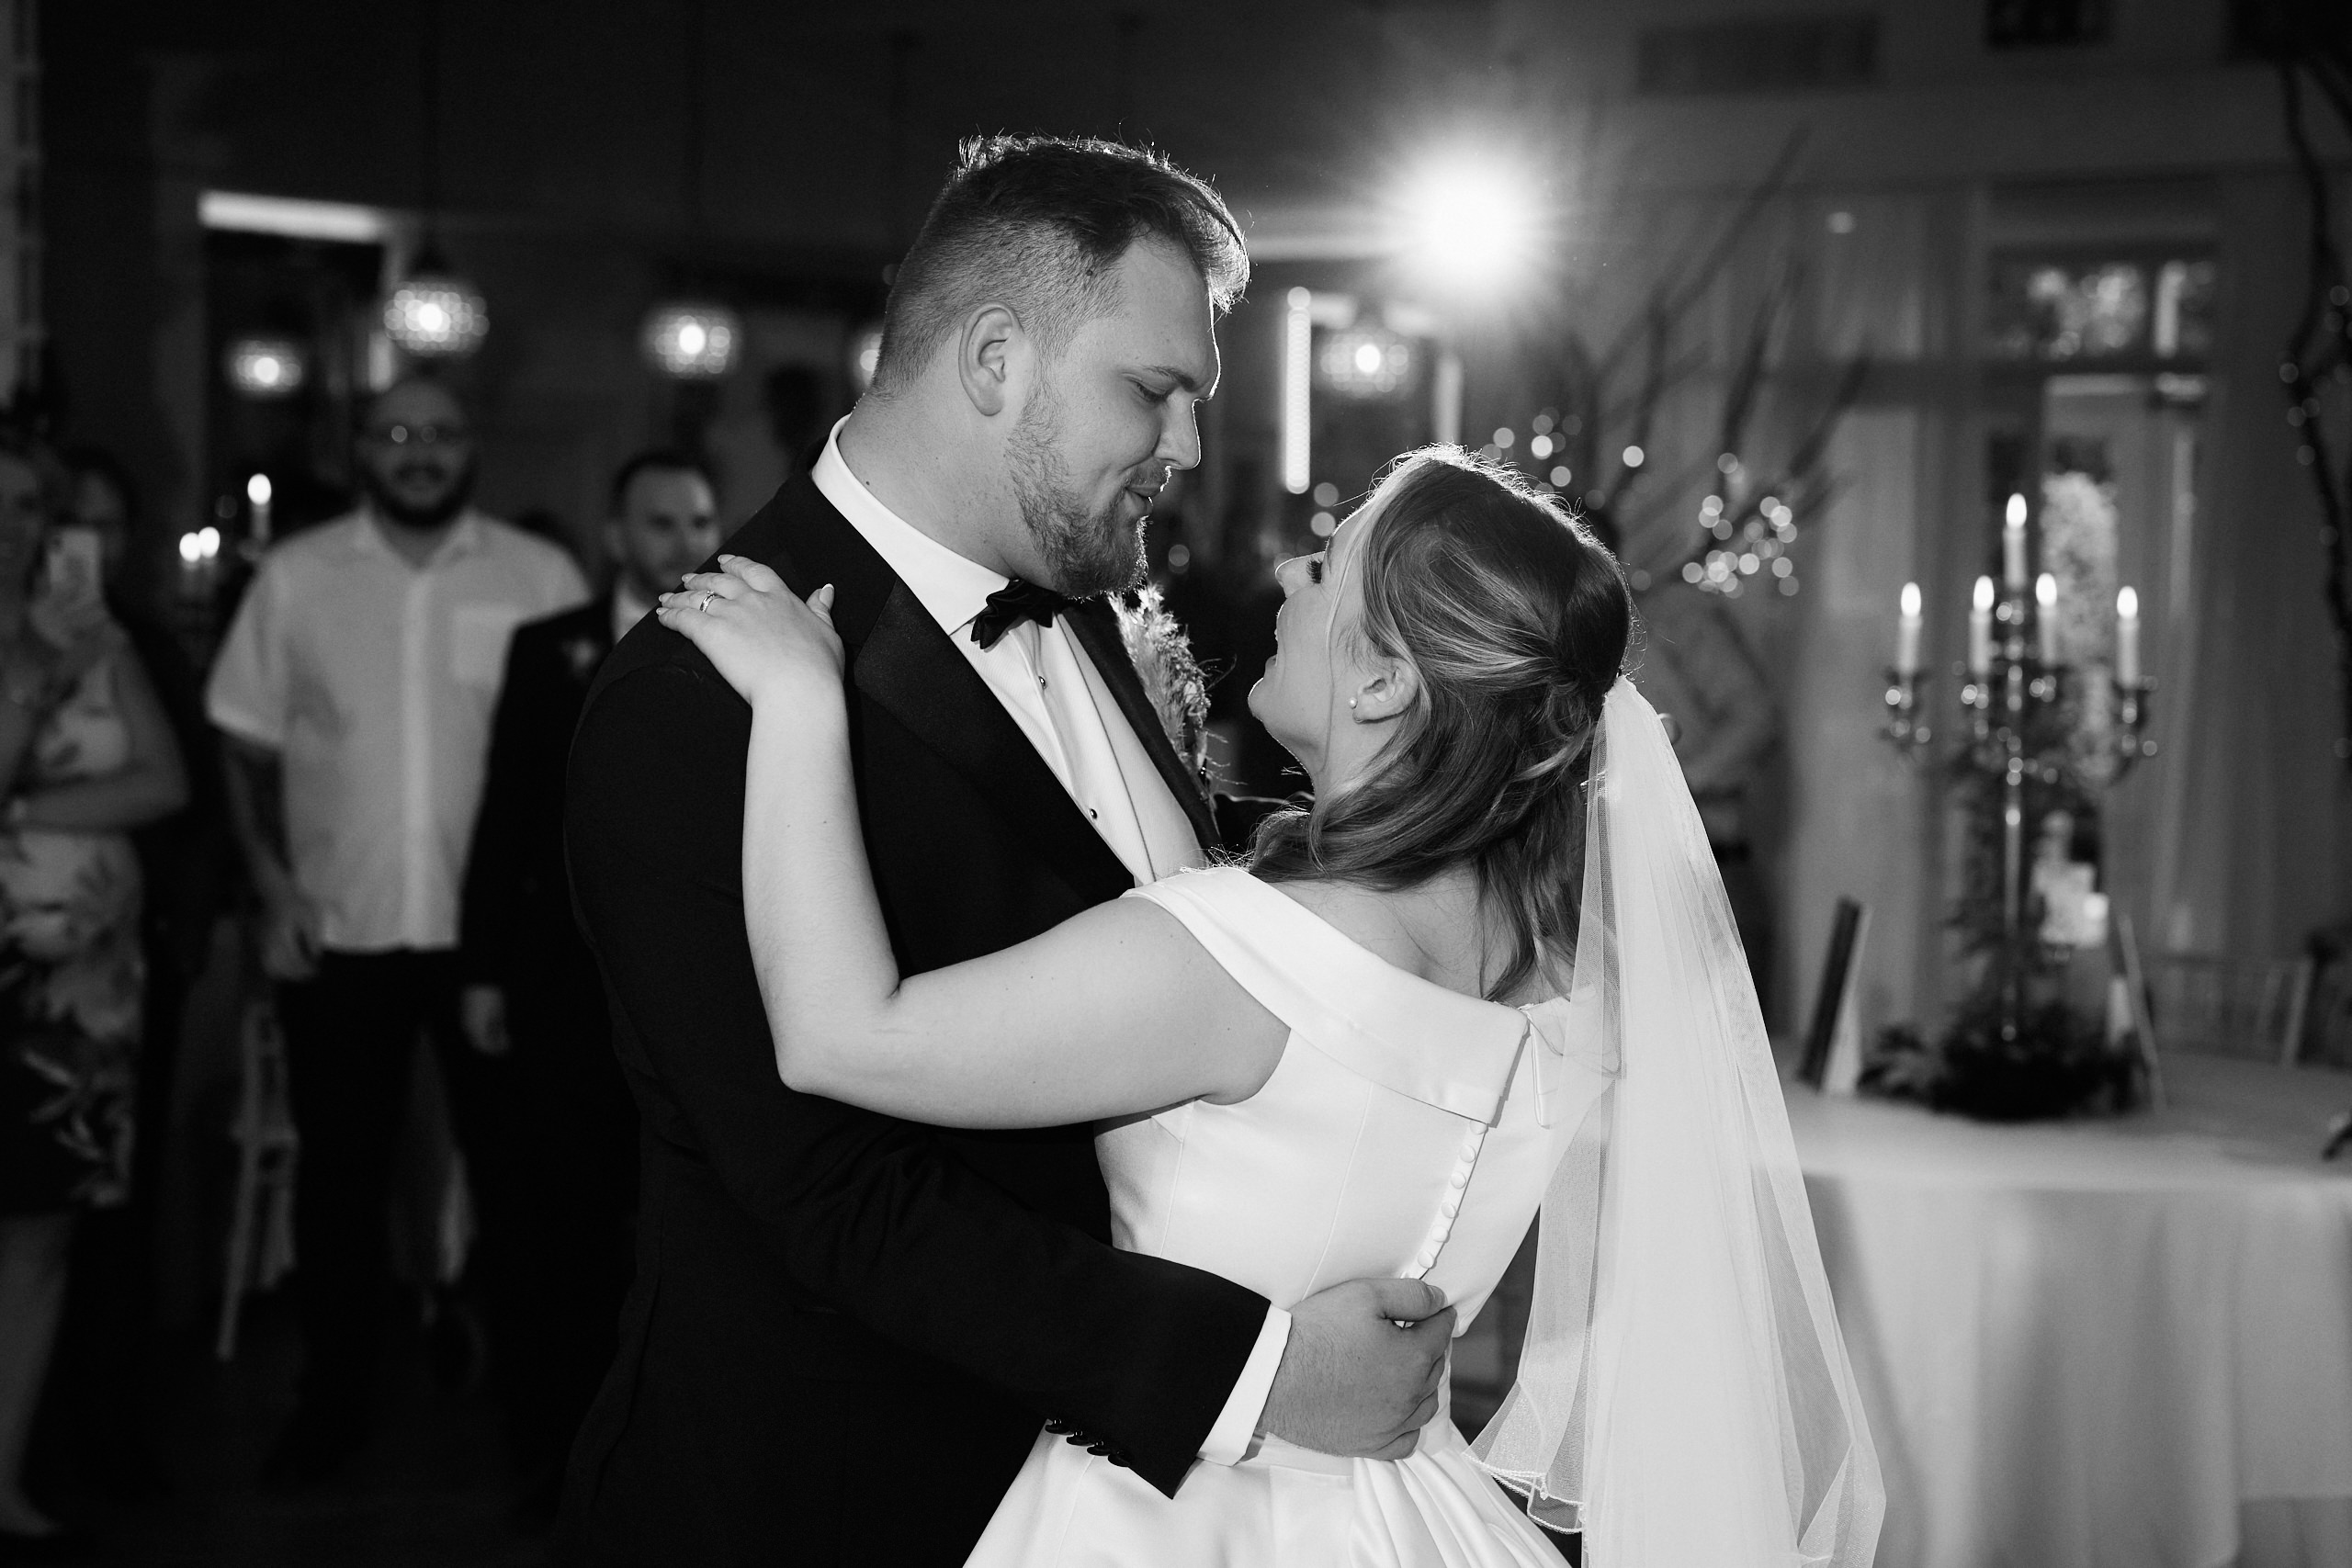 A couple having their first dance at their wedding.